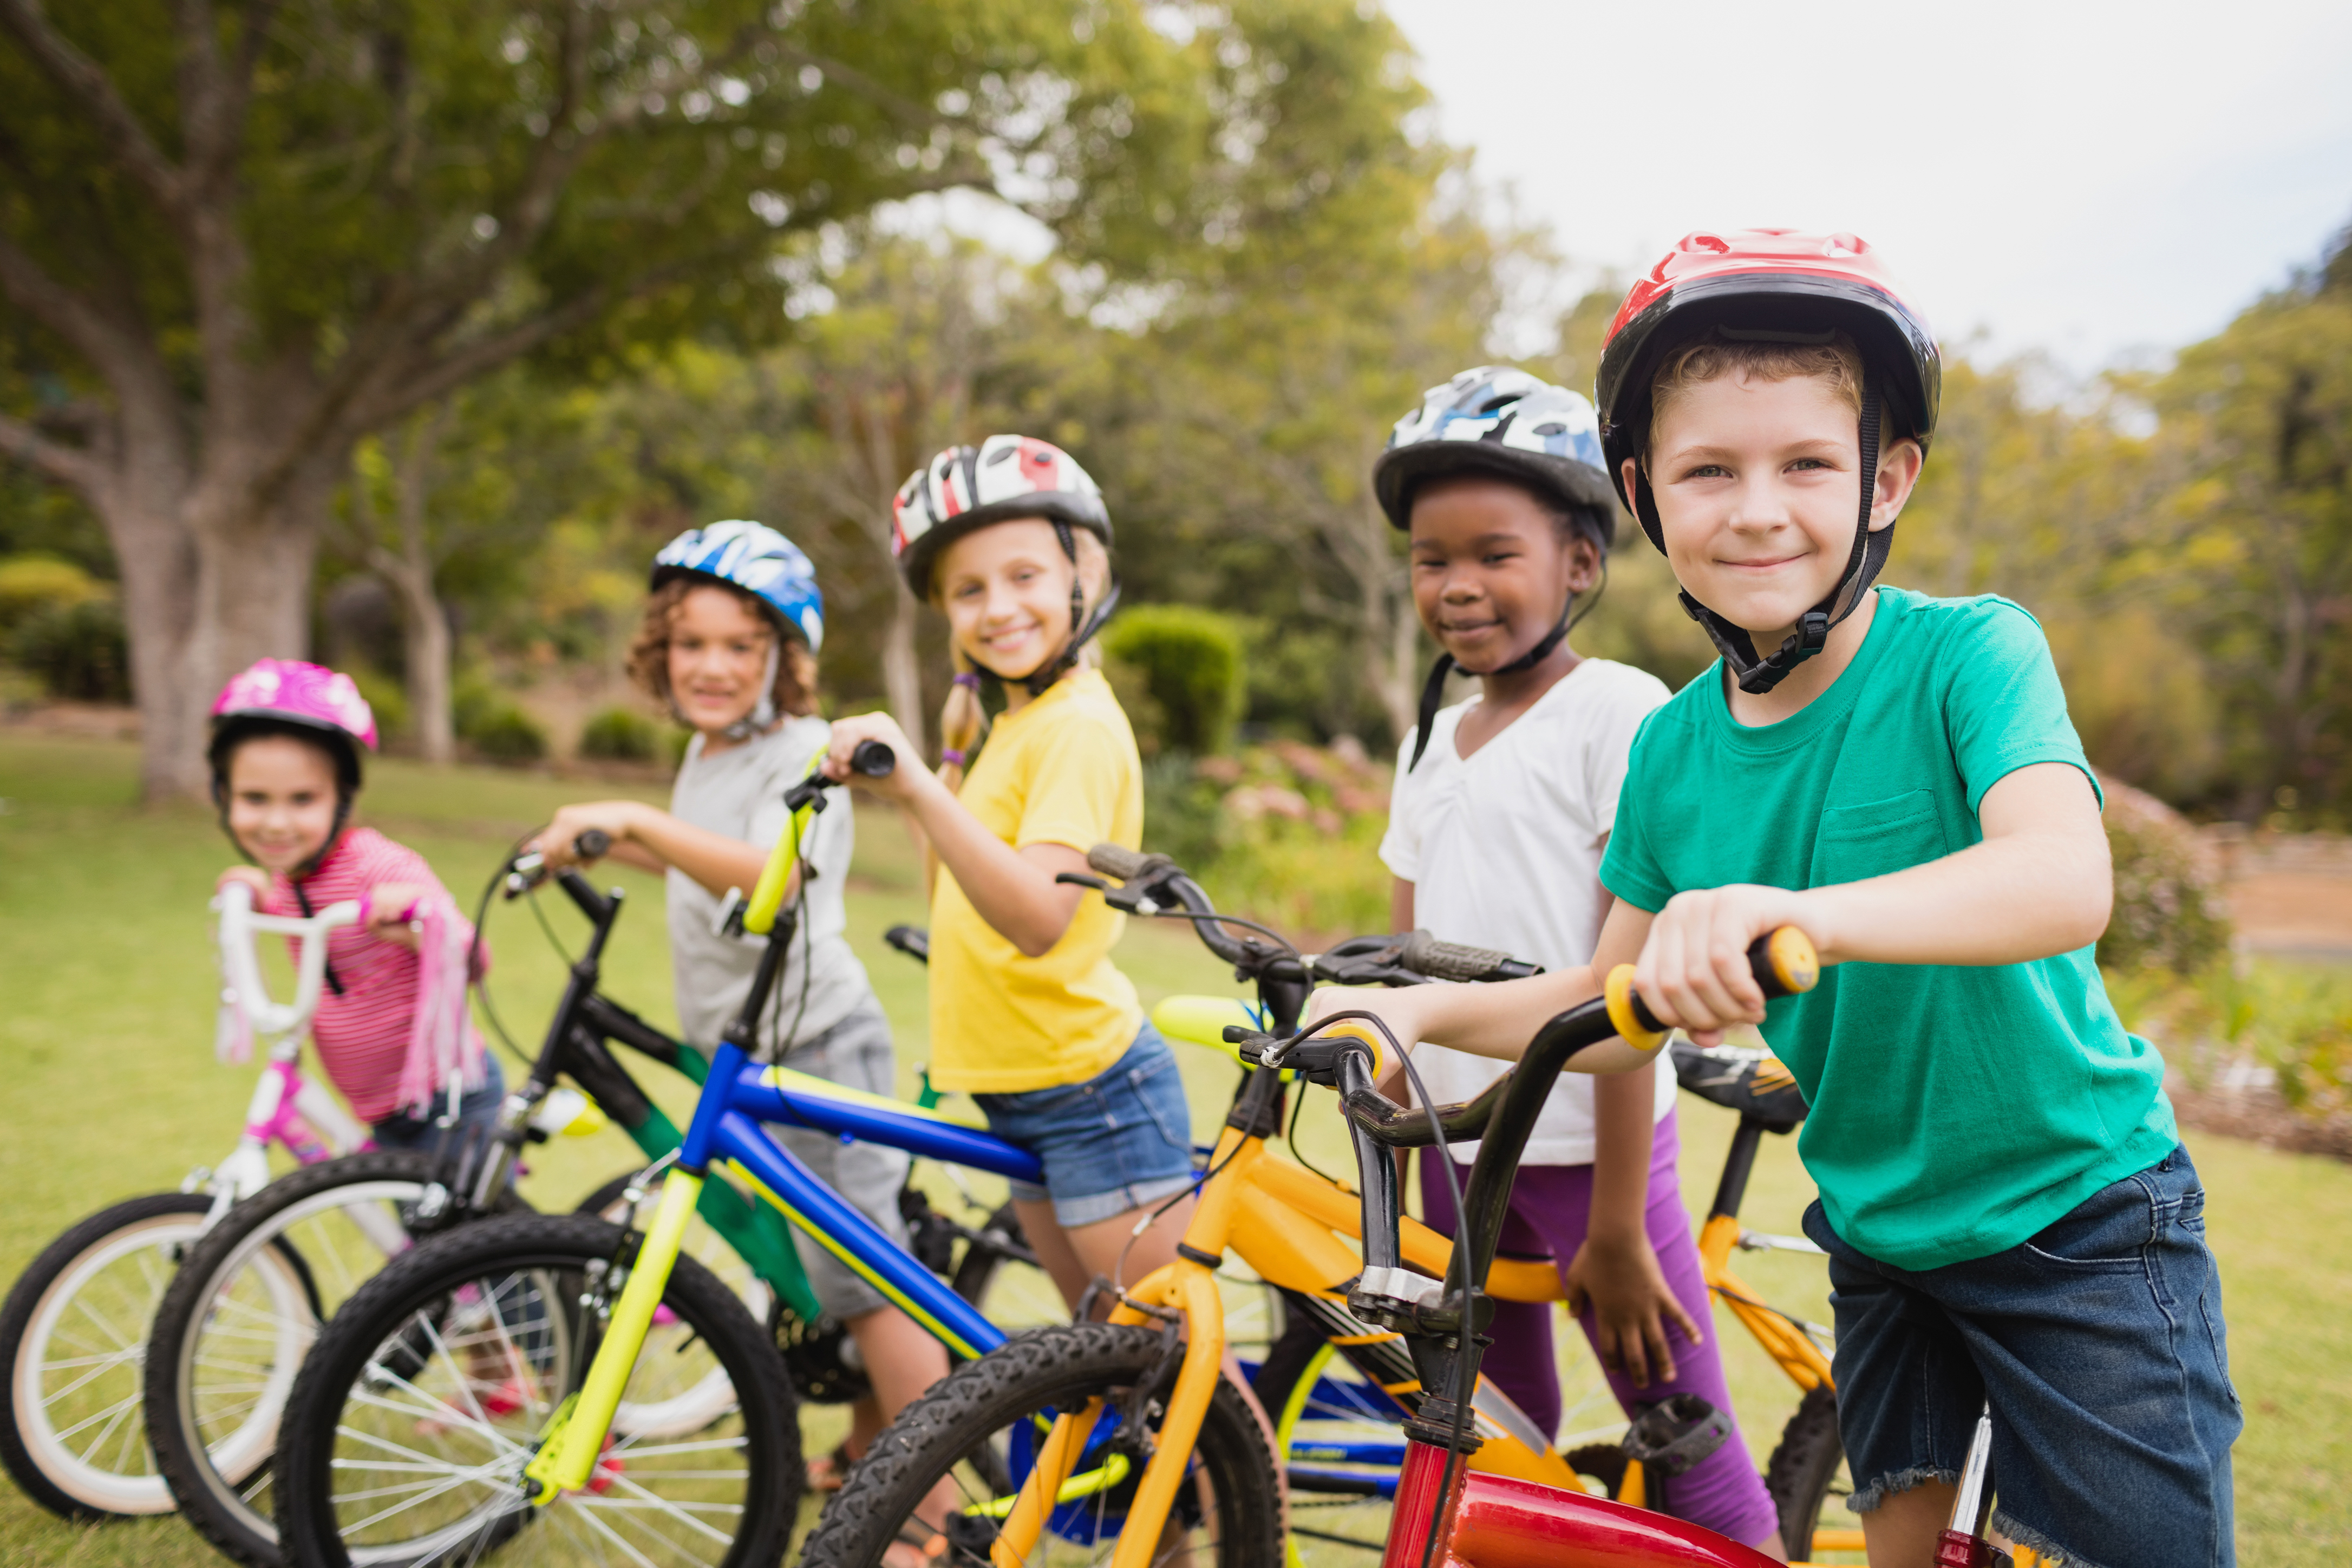 A group of children on bicycles, smiling at the camera.